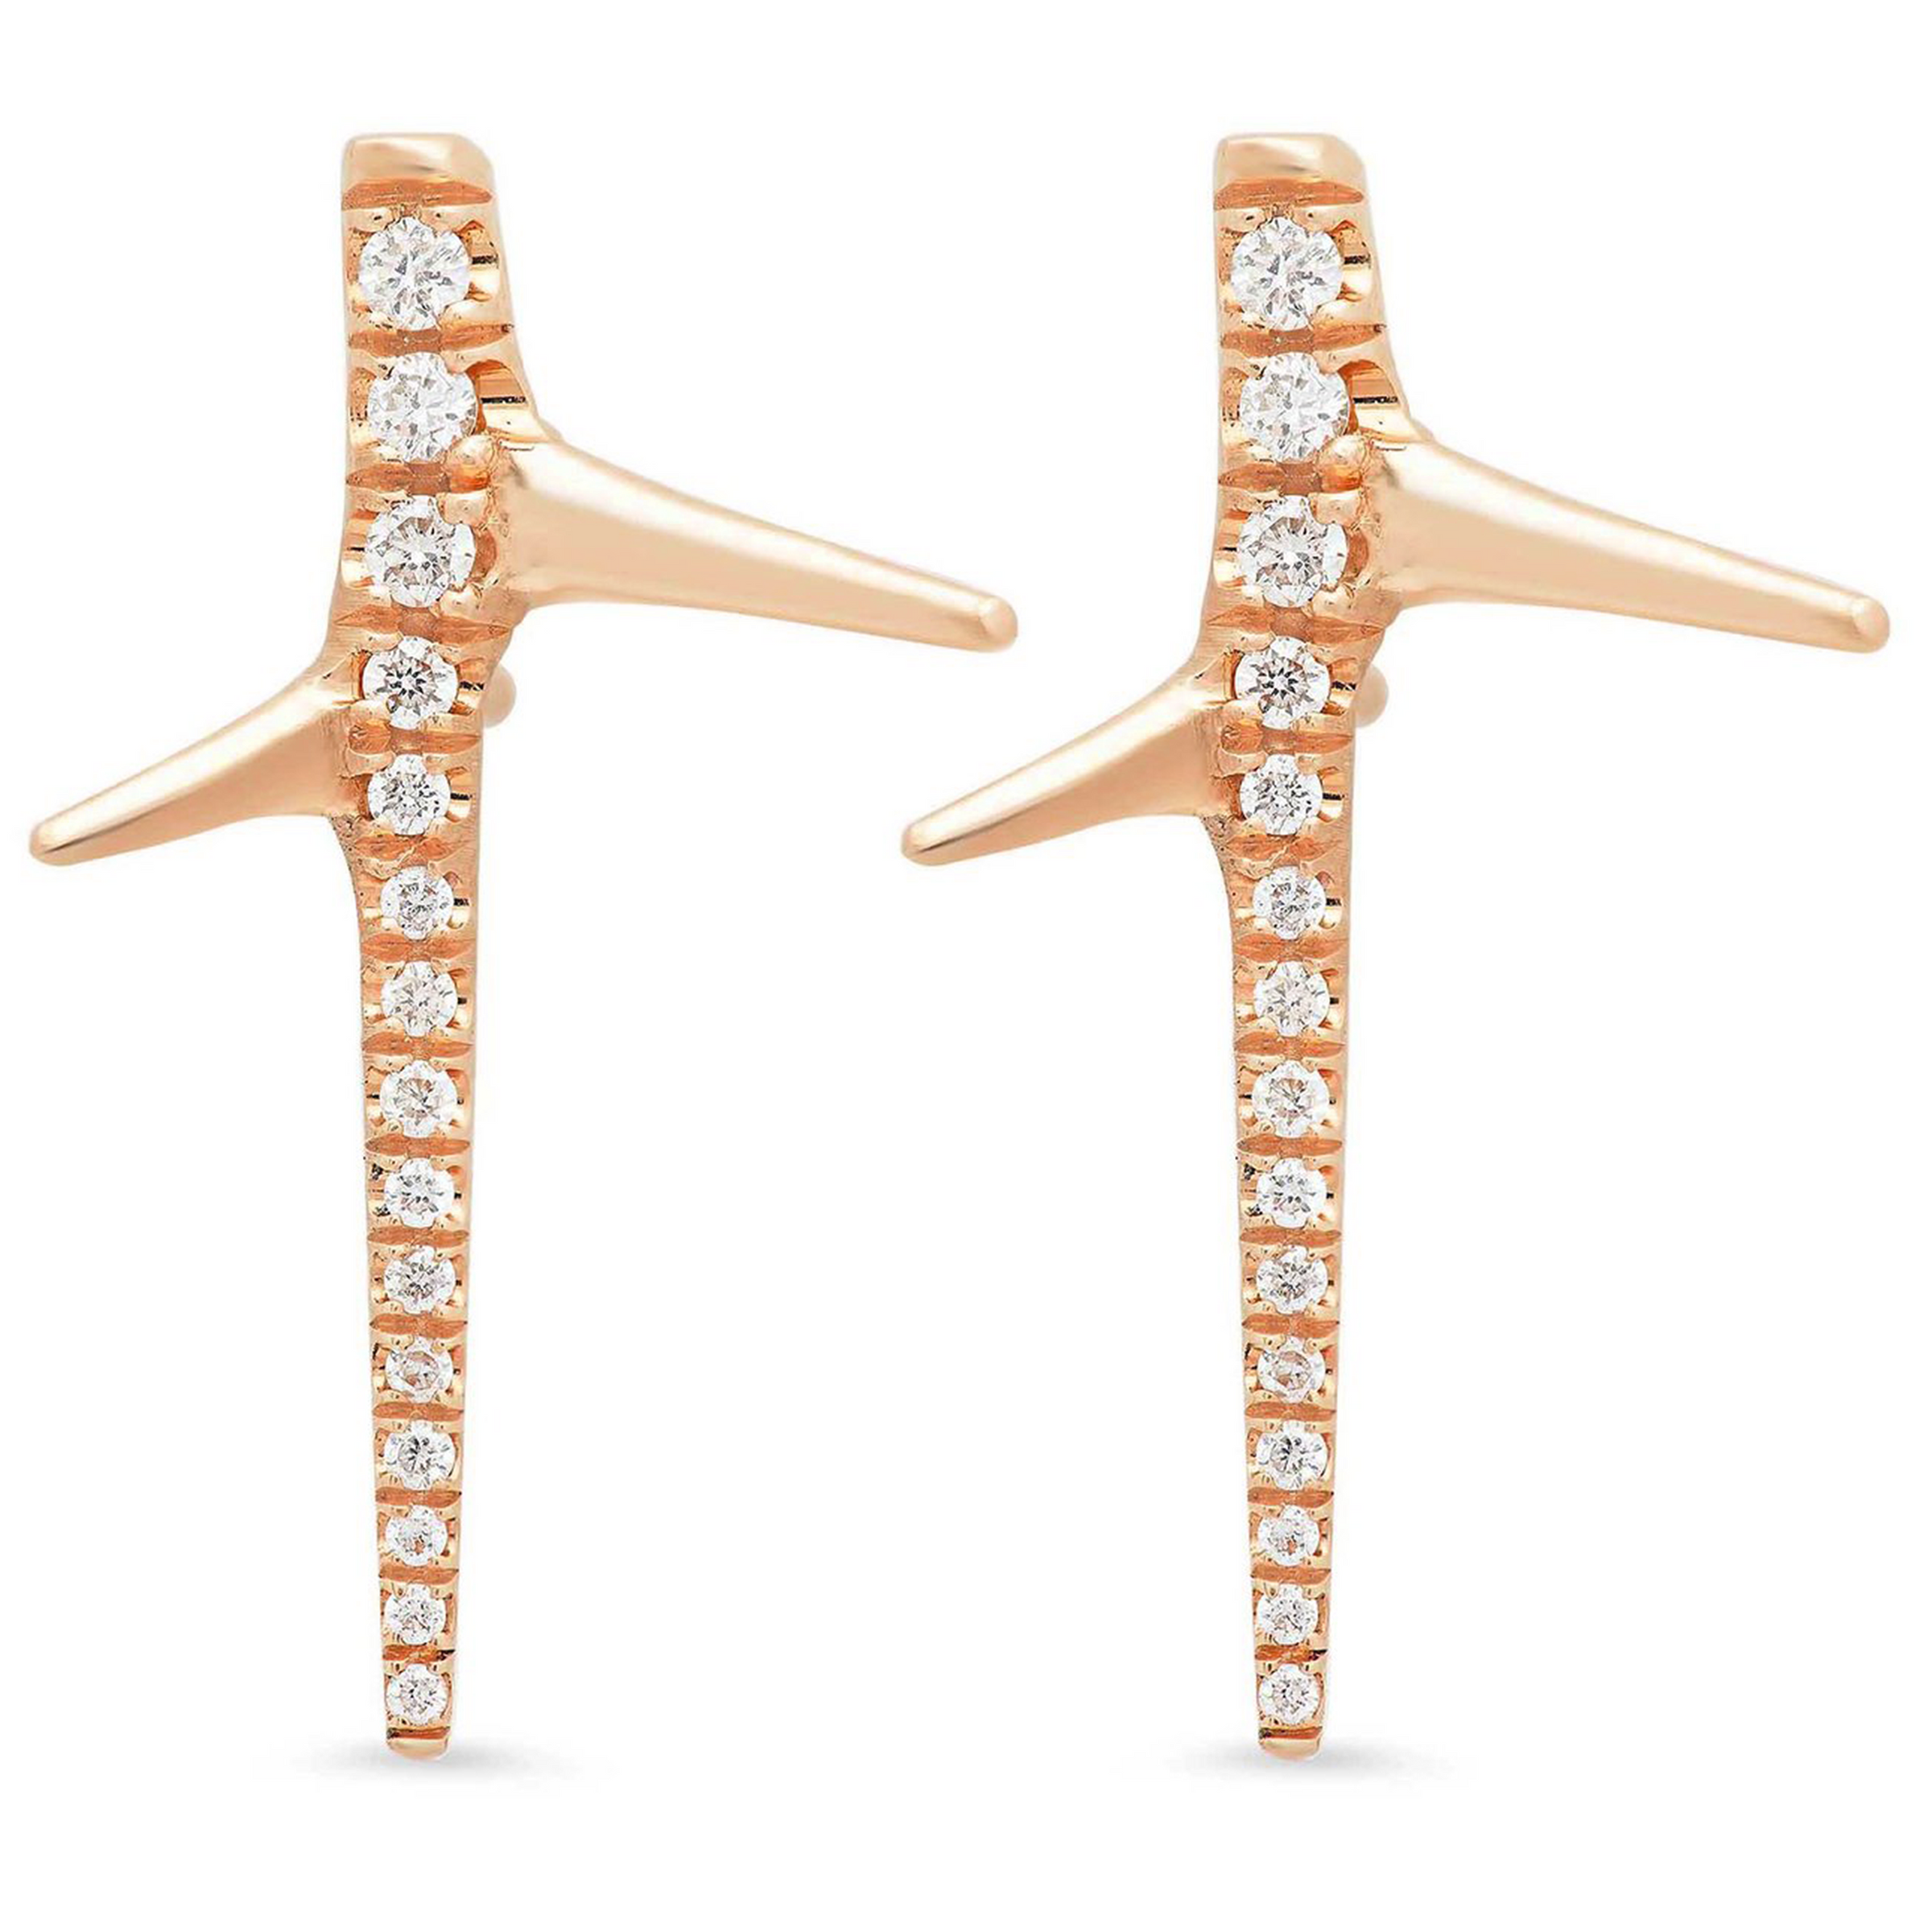 Thorn Studs Stud Earrings Elisabeth Bell Jewelry Rose Gold with Diamonds  